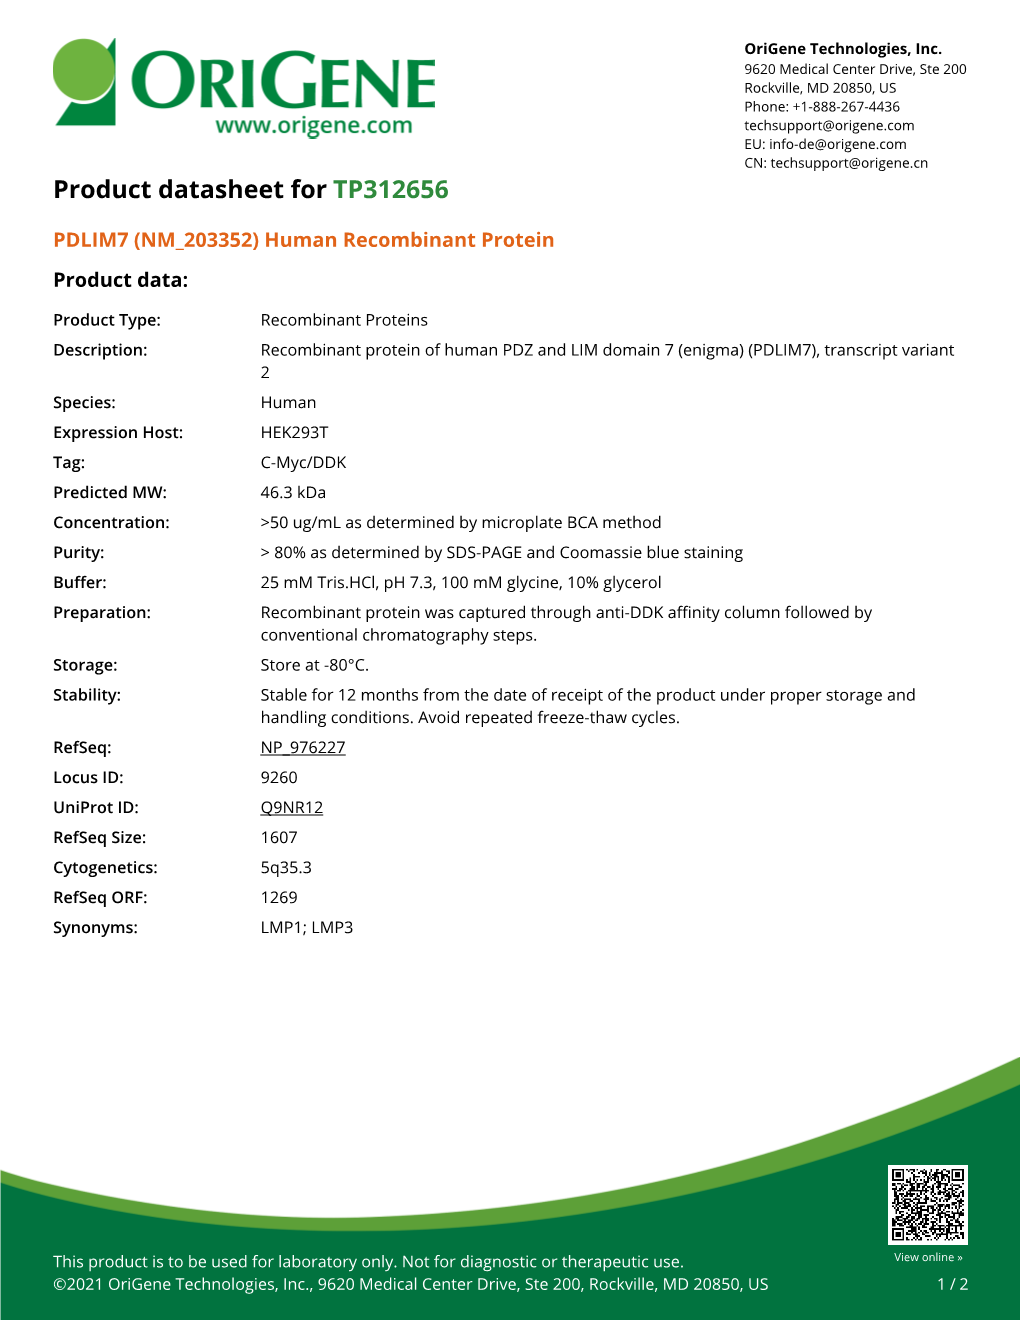 PDLIM7 (NM 203352) Human Recombinant Protein Product Data